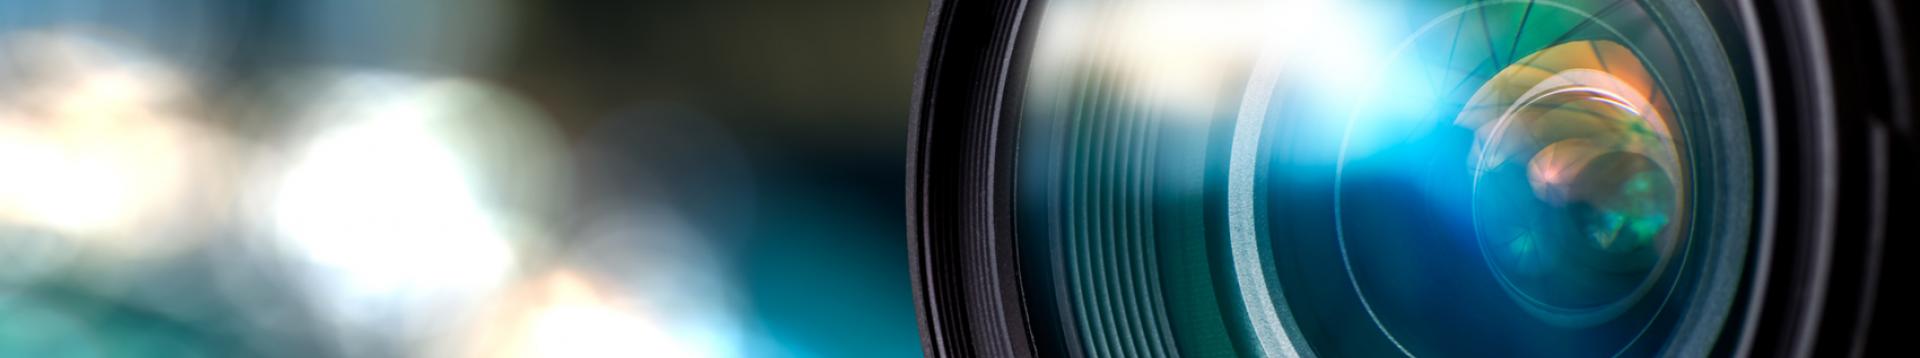 zoom on a camera lens - shutterstock